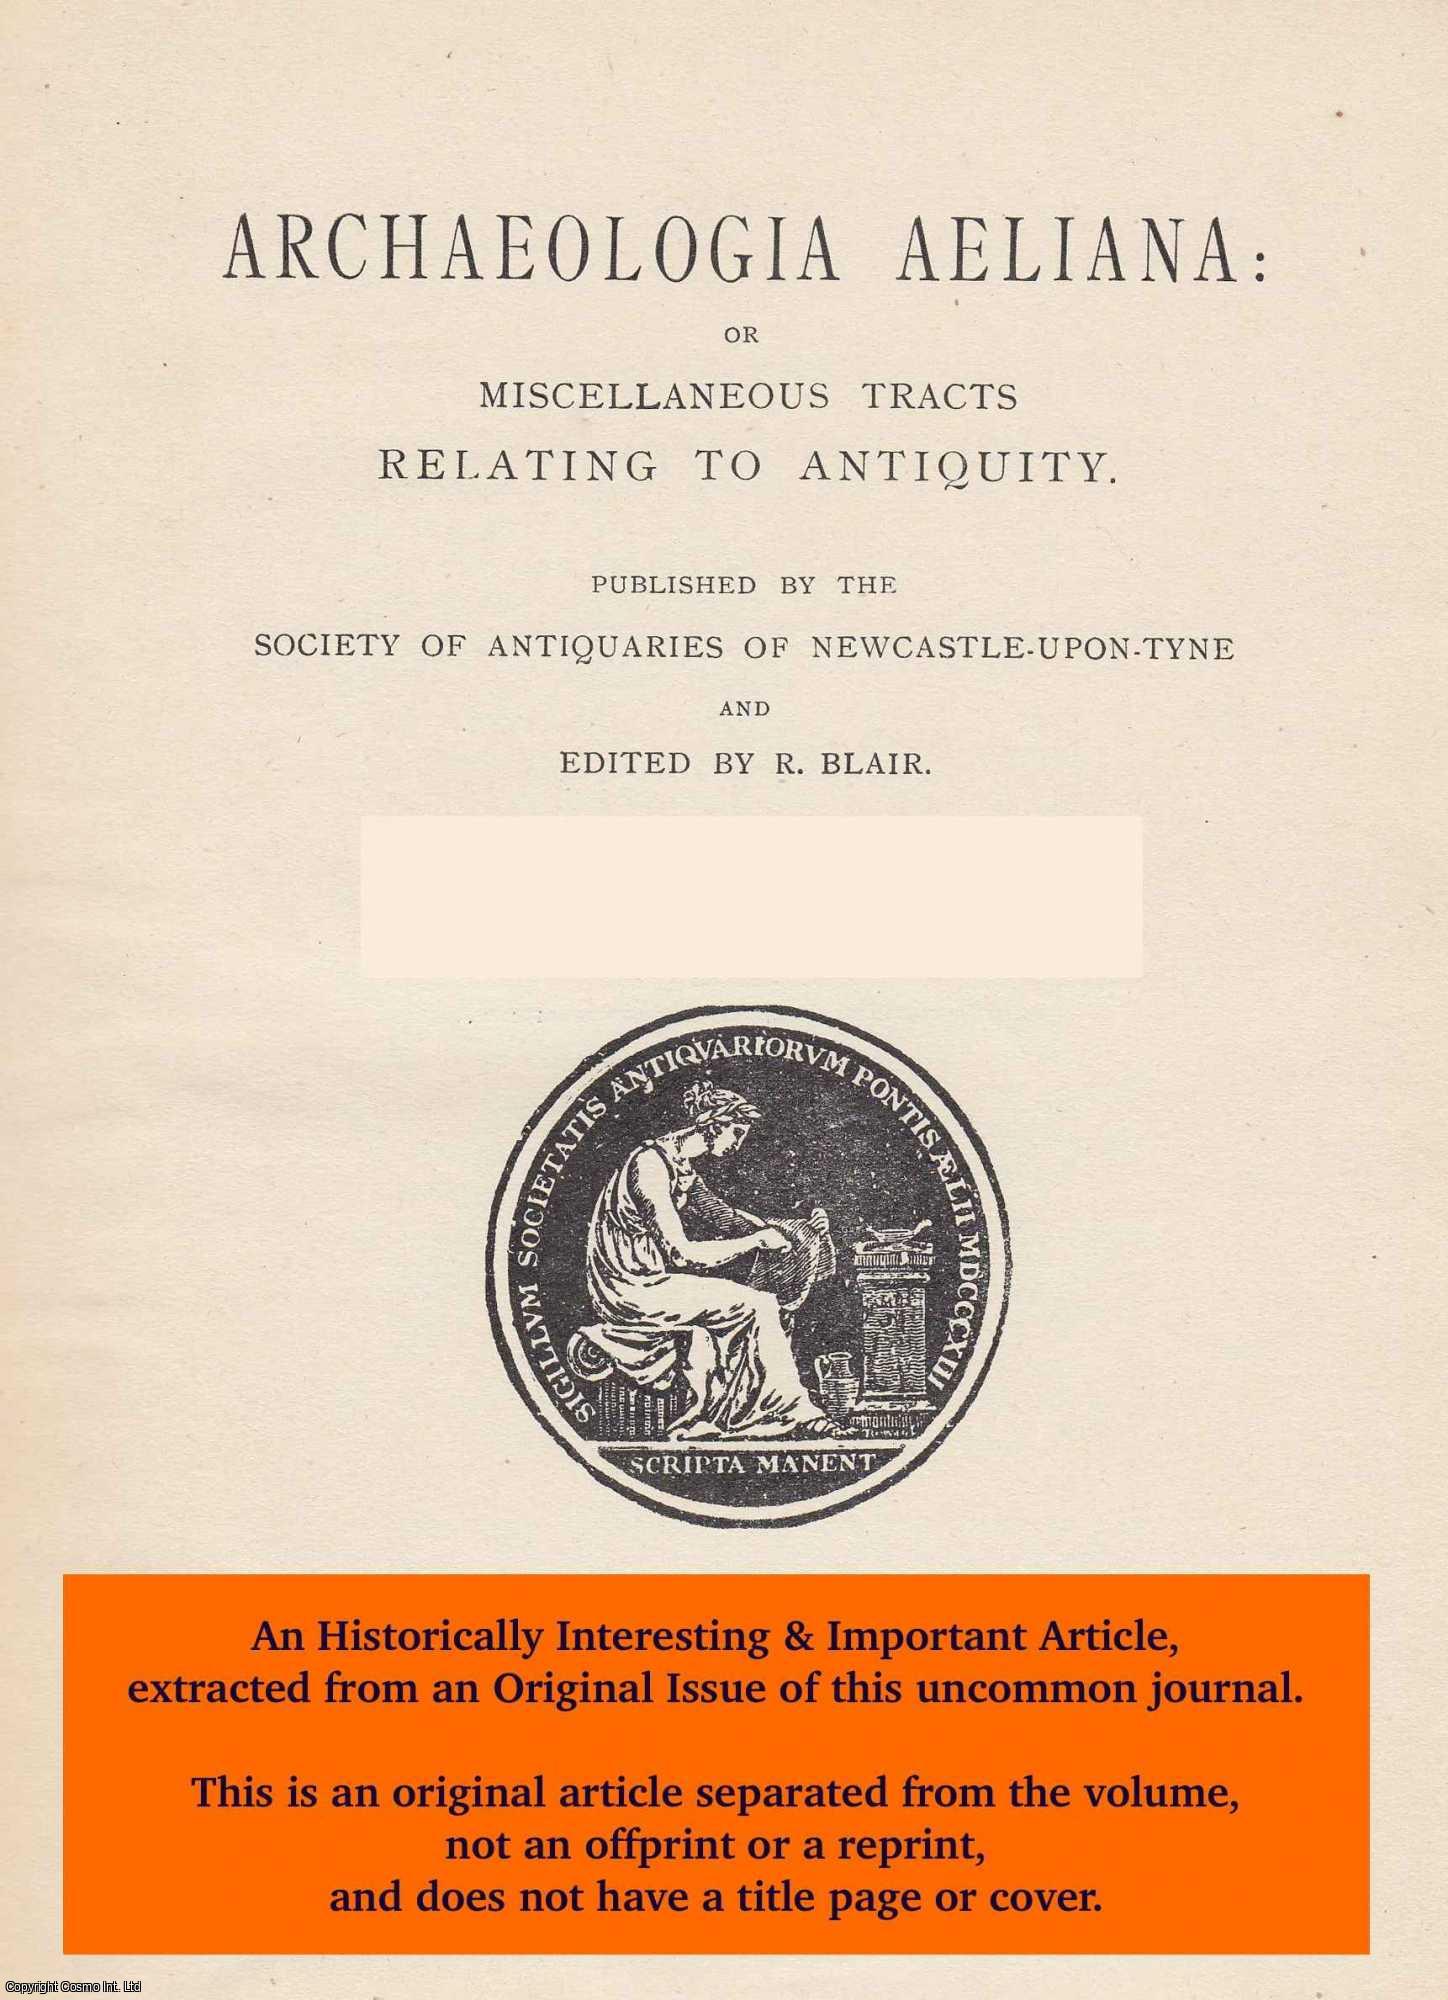 R. H. Forster & H. H. E. Craster & F. Haverfield & W. H. Knowles & A. Meek, R. H. - Corstopitum. Report of The Excavations in 1907. An original article from The Archaeologia Aeliana: or Miscellaneous Tracts Relating to Antiquity, 1908.